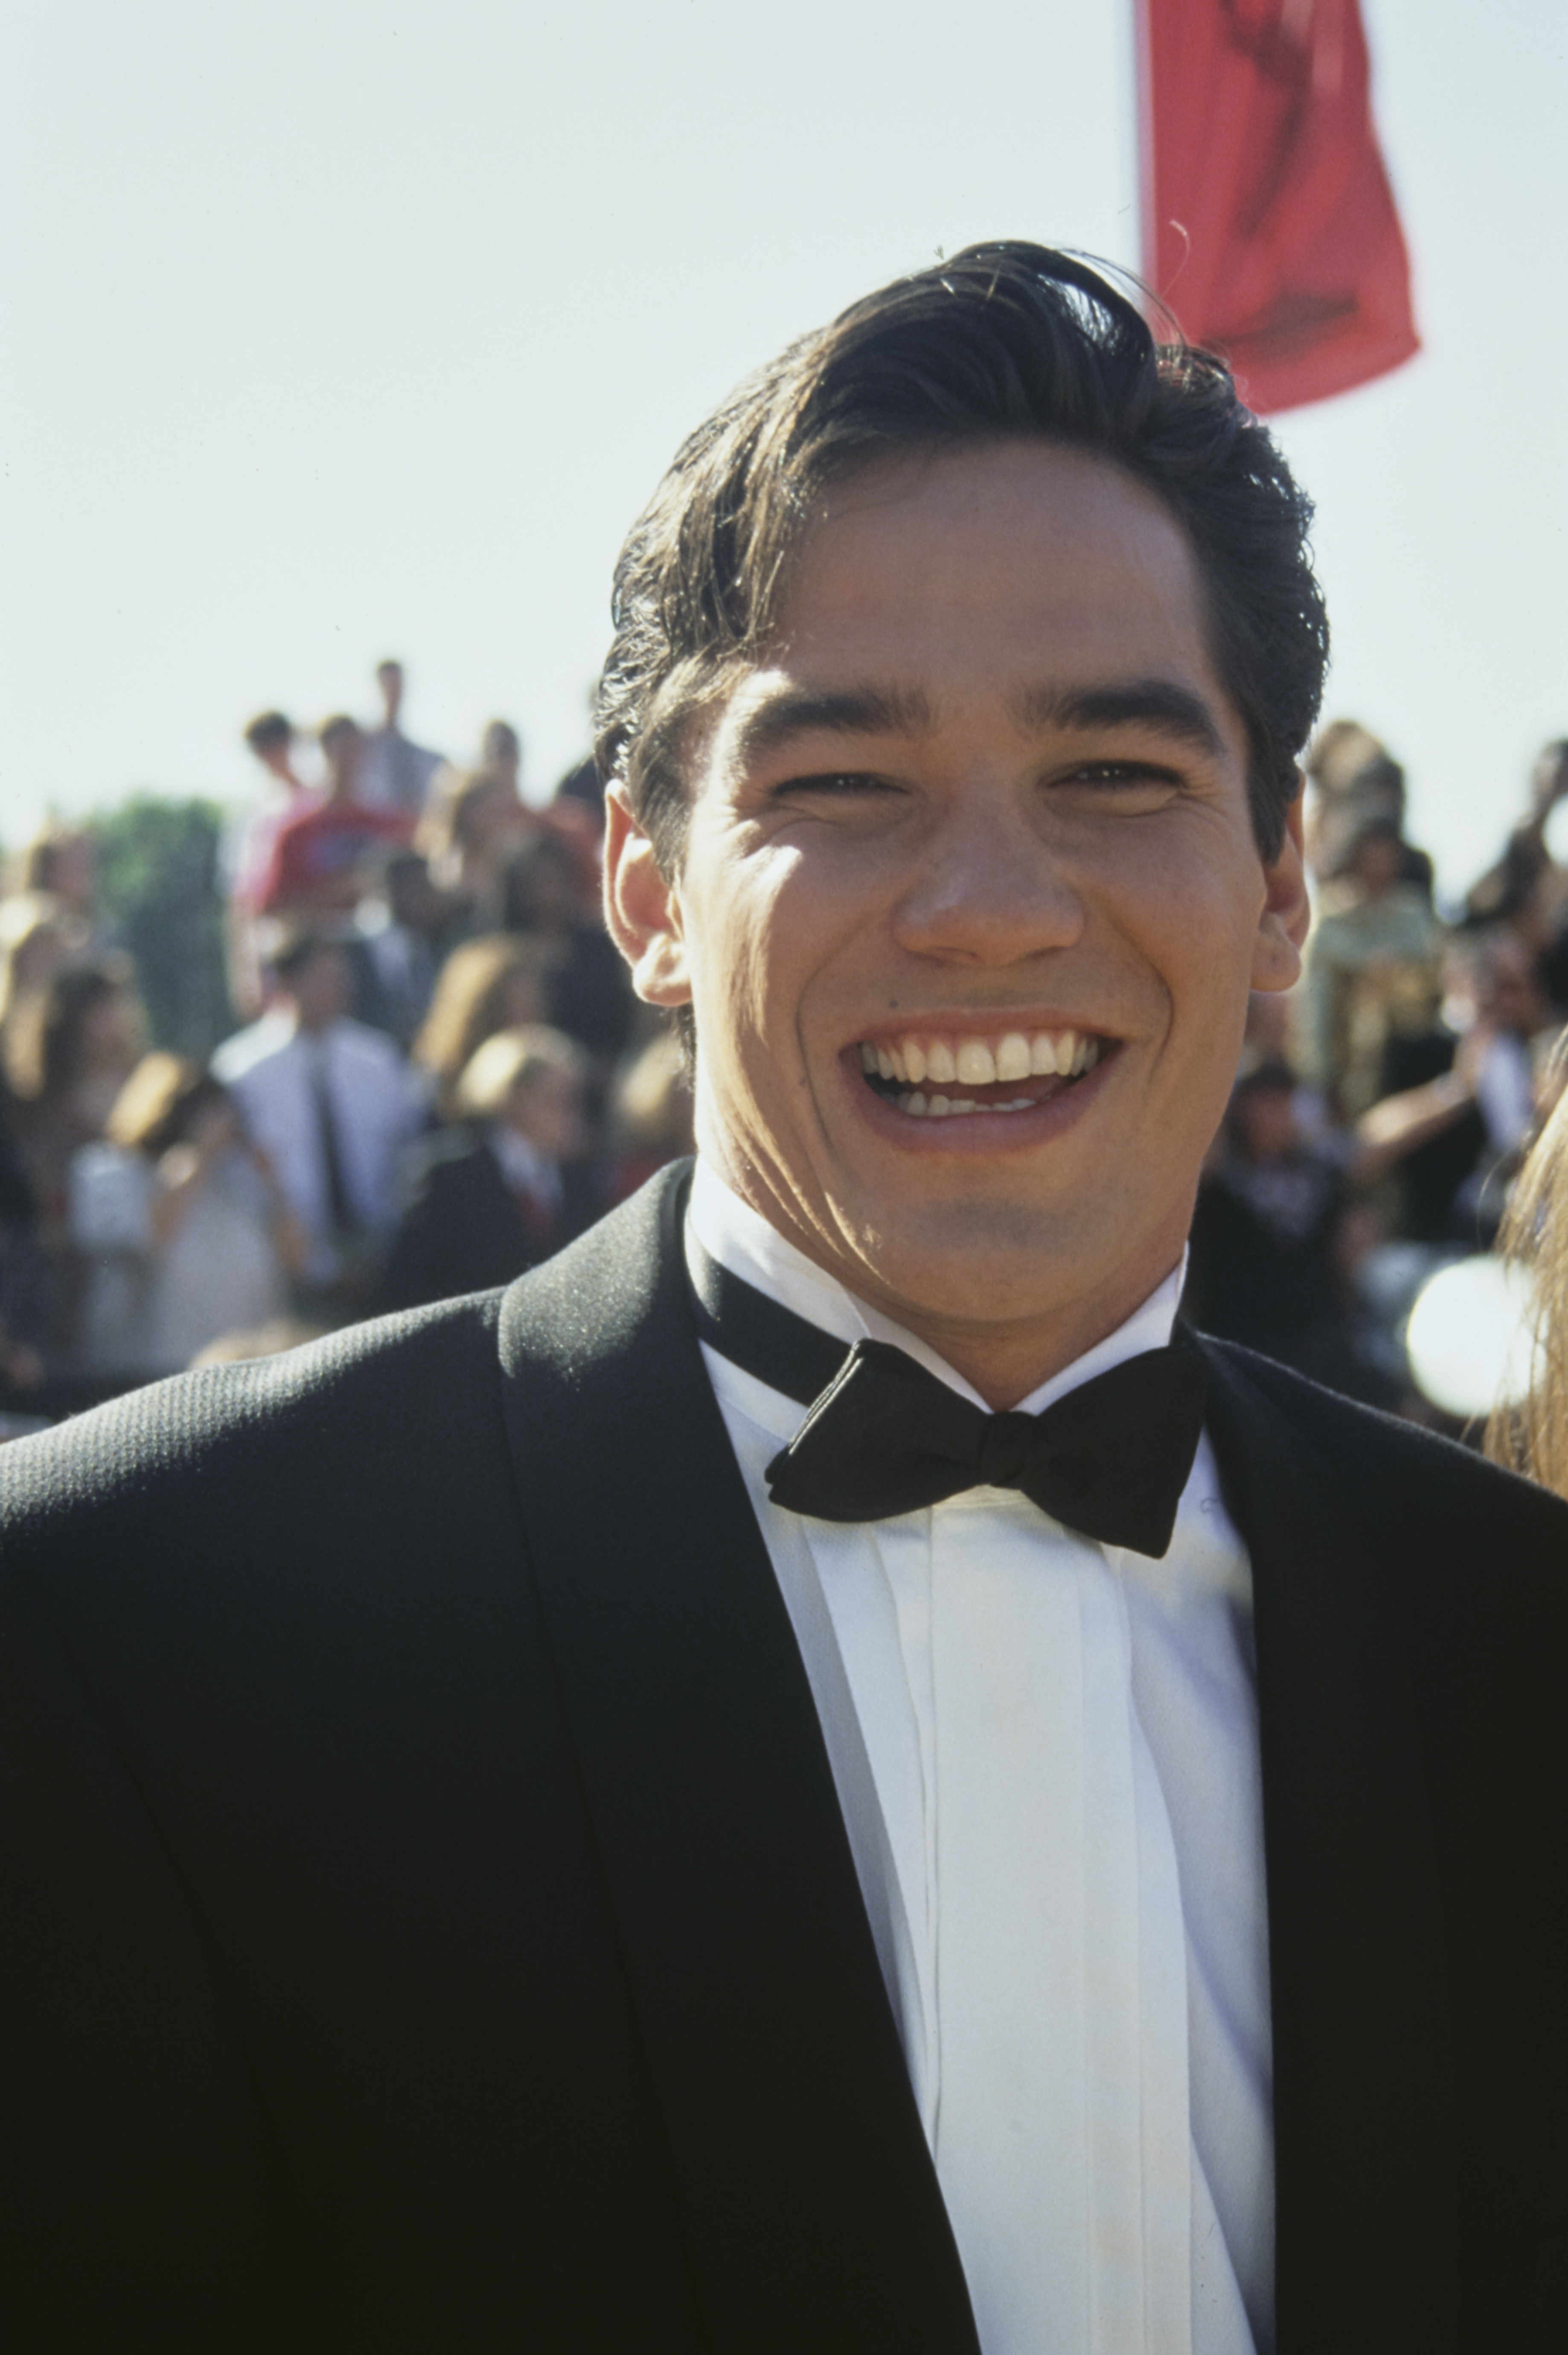 Dean Cain at the 45th Annual Primetime Emmy Awards in Pasadena, California on September 19, 1993 | Source: Getty Images